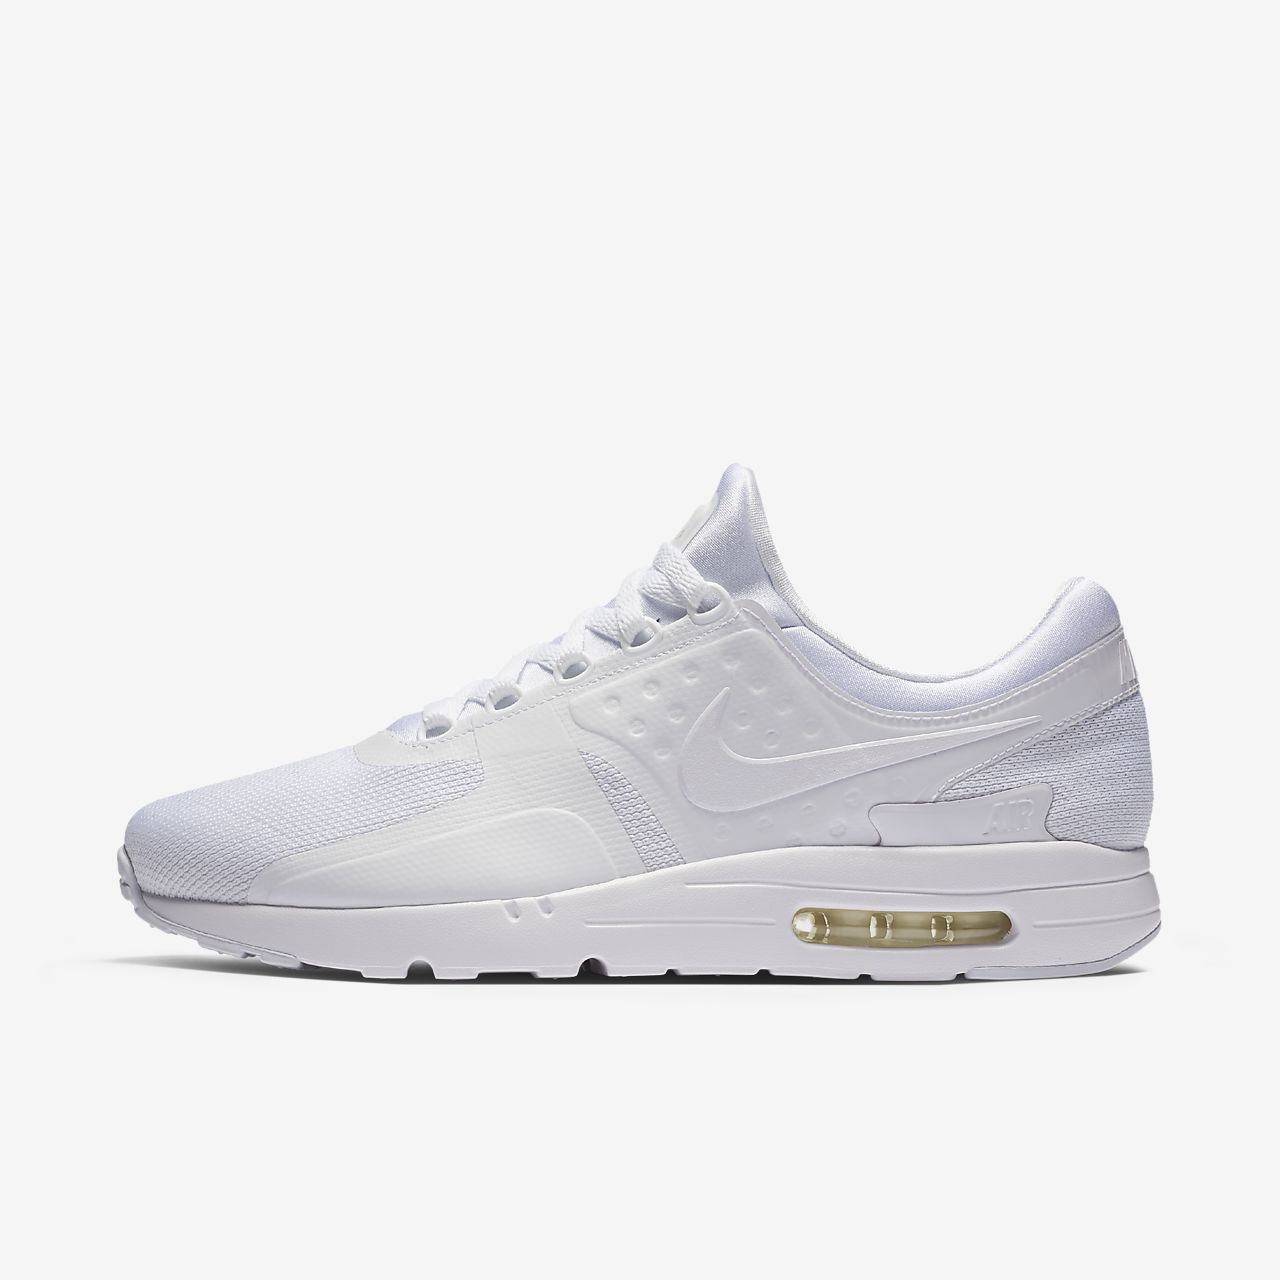 nike air max zero size 9 for sale